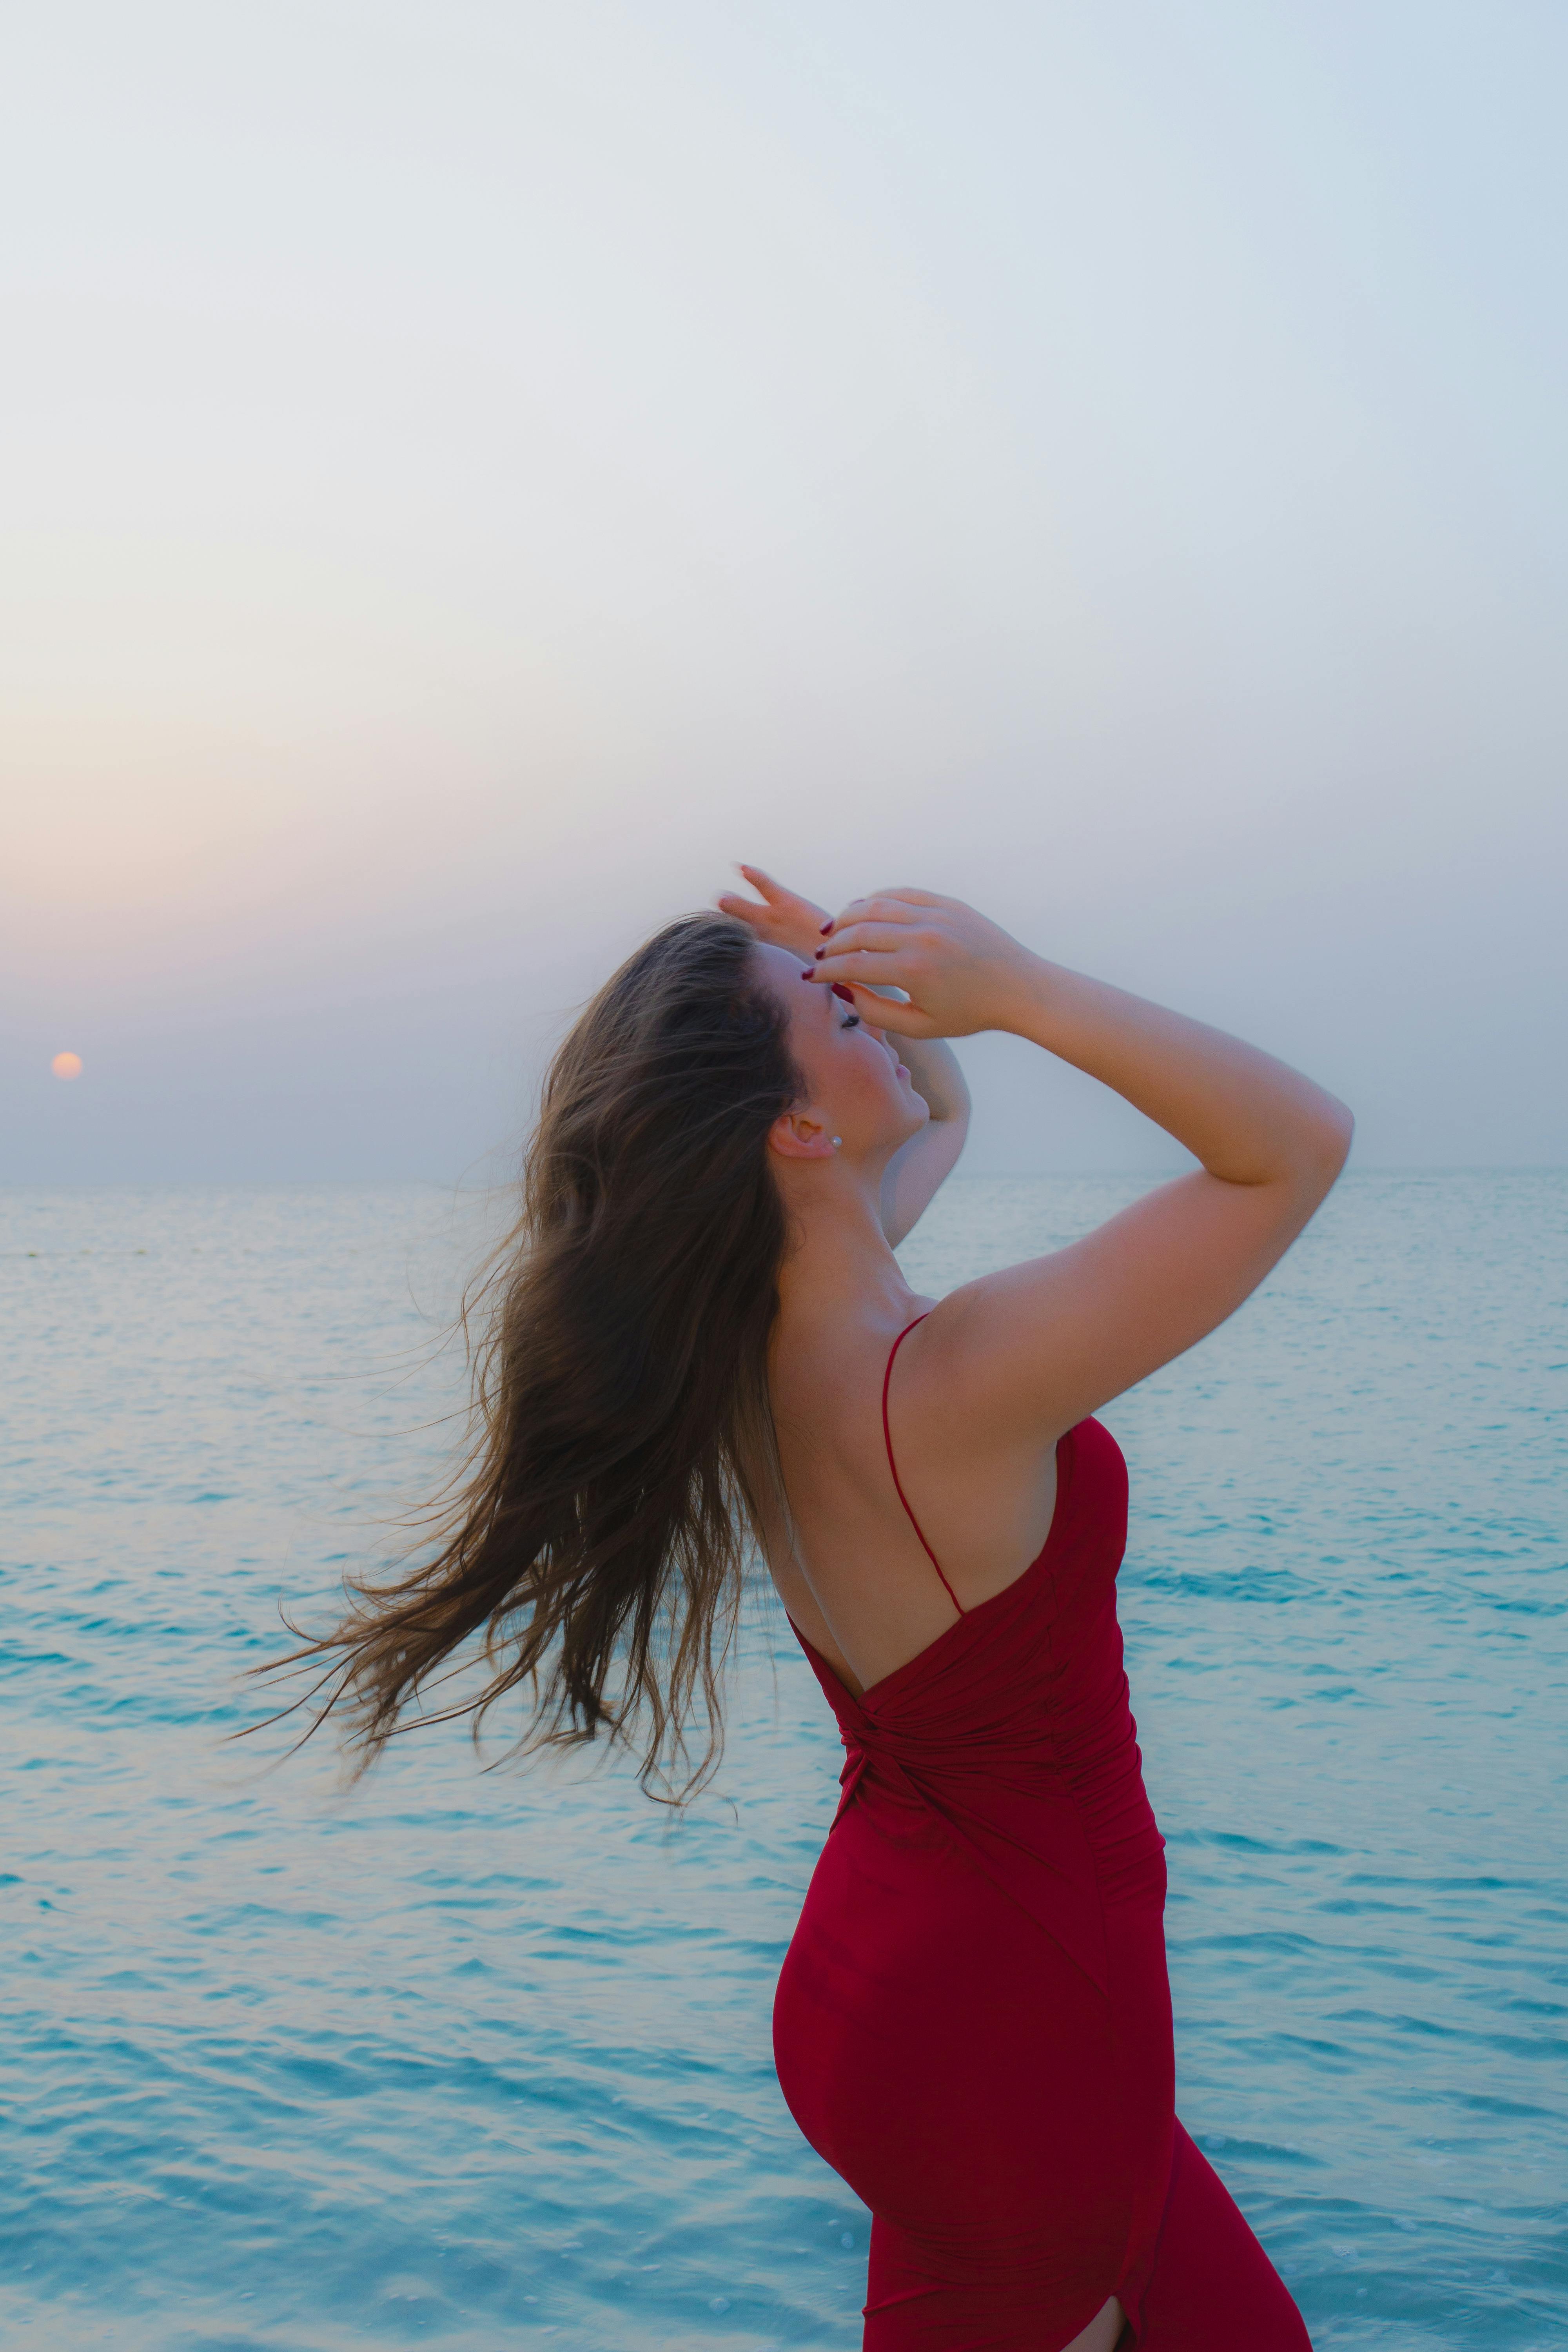 Expert Woman Training Yoga In The Morning By The Sea Performing A  Titibasana Pose Stock Photo - Download Image Now - iStock